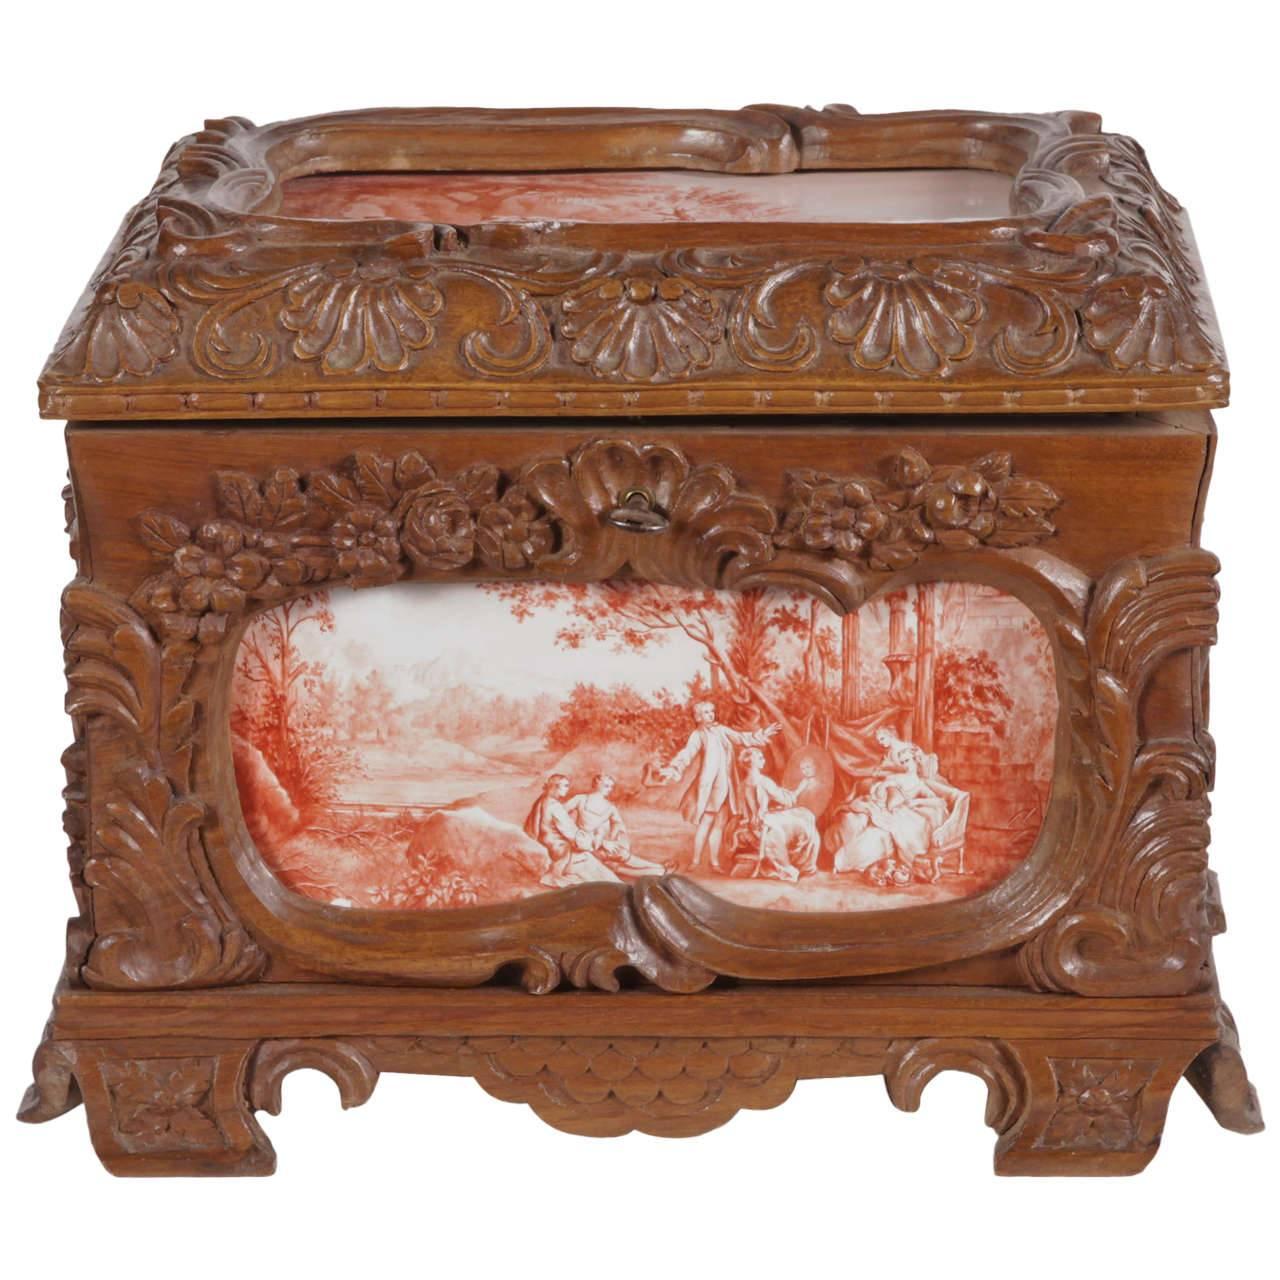 Louis XV 19th Century French Carved Walnut Jewelry Box with Painted Pastoral Scenes Tiles